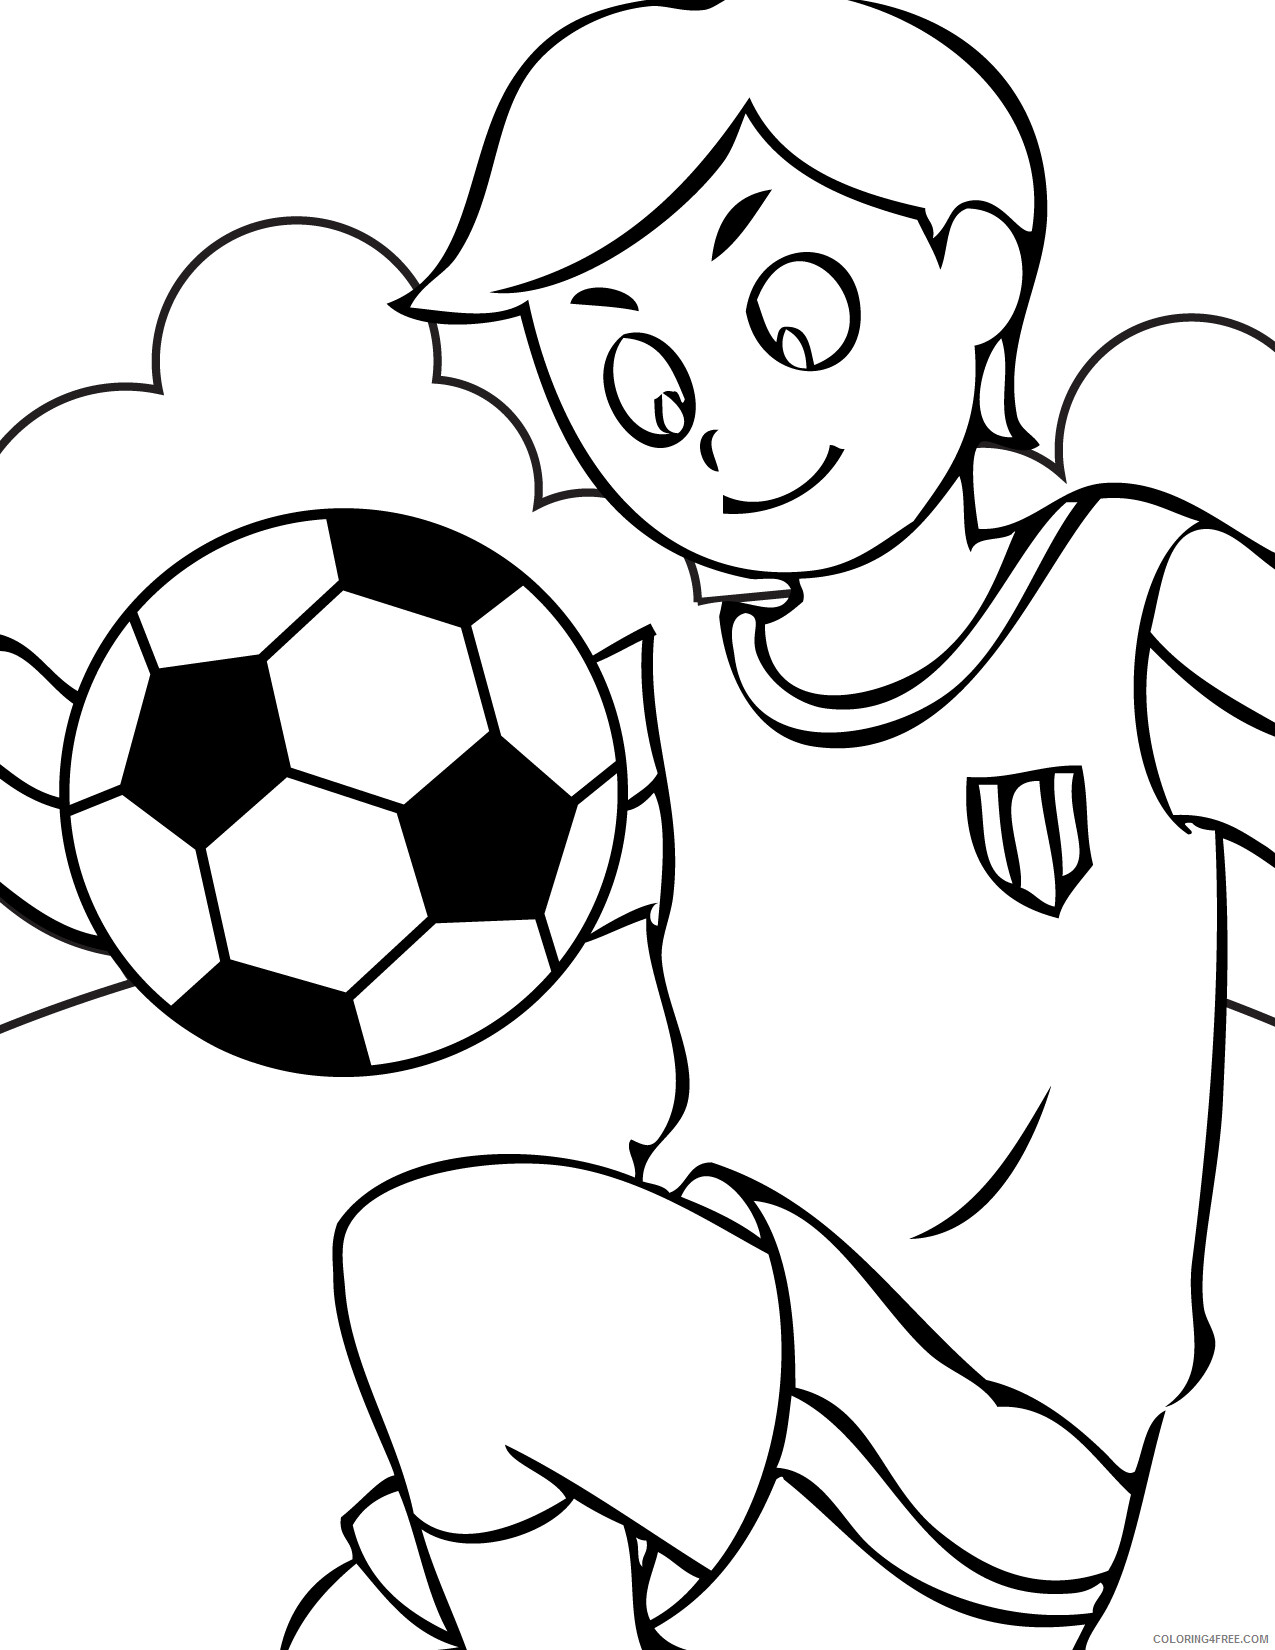 Soccer Coloring Pages for boys Soccer Printable 2020 0906 Coloring4free